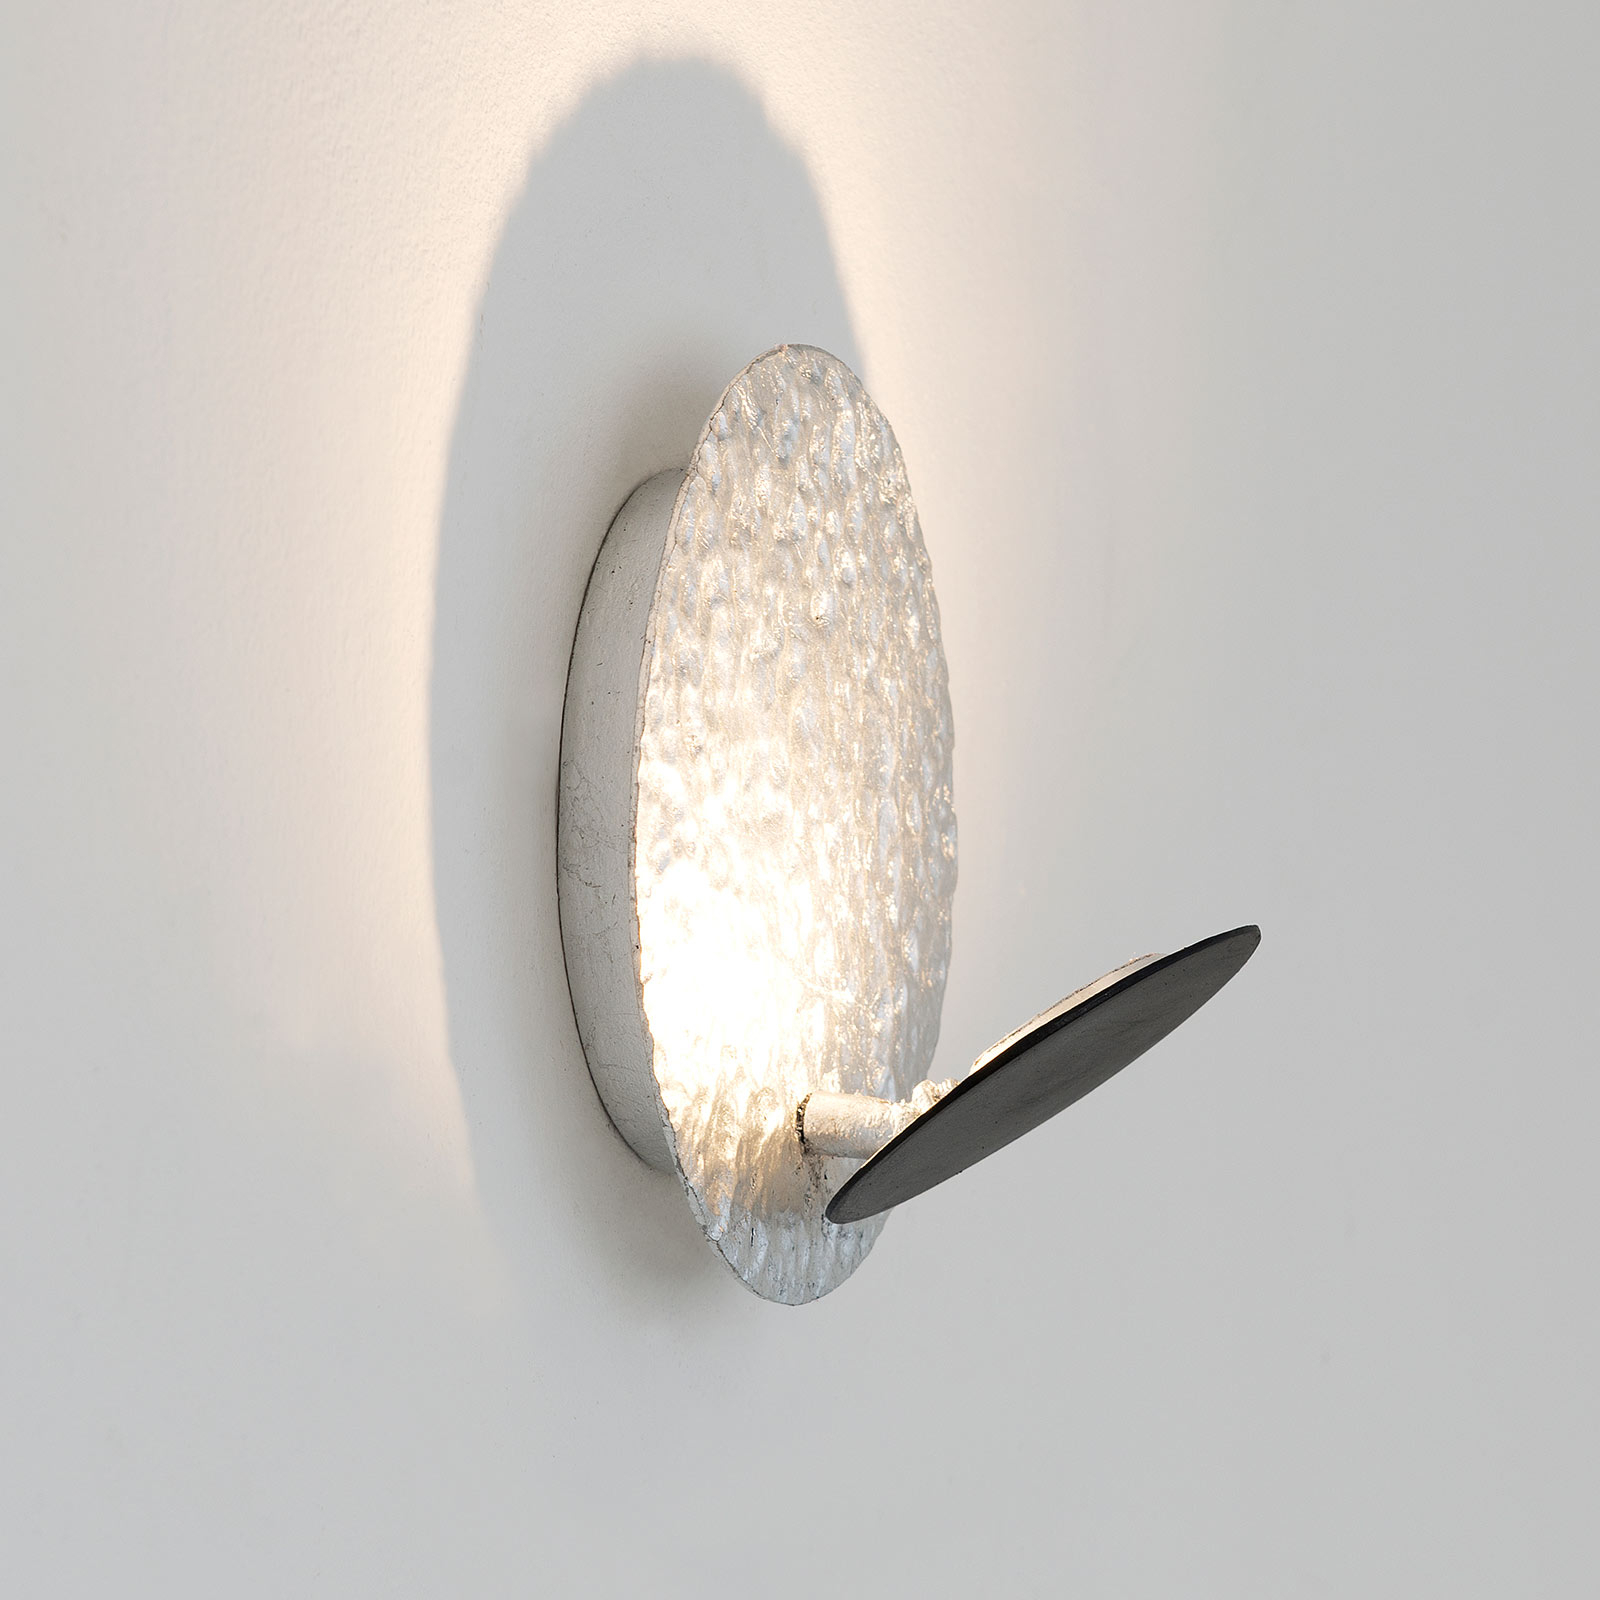 Infinity LED wall light in silver, Ø 26 cm